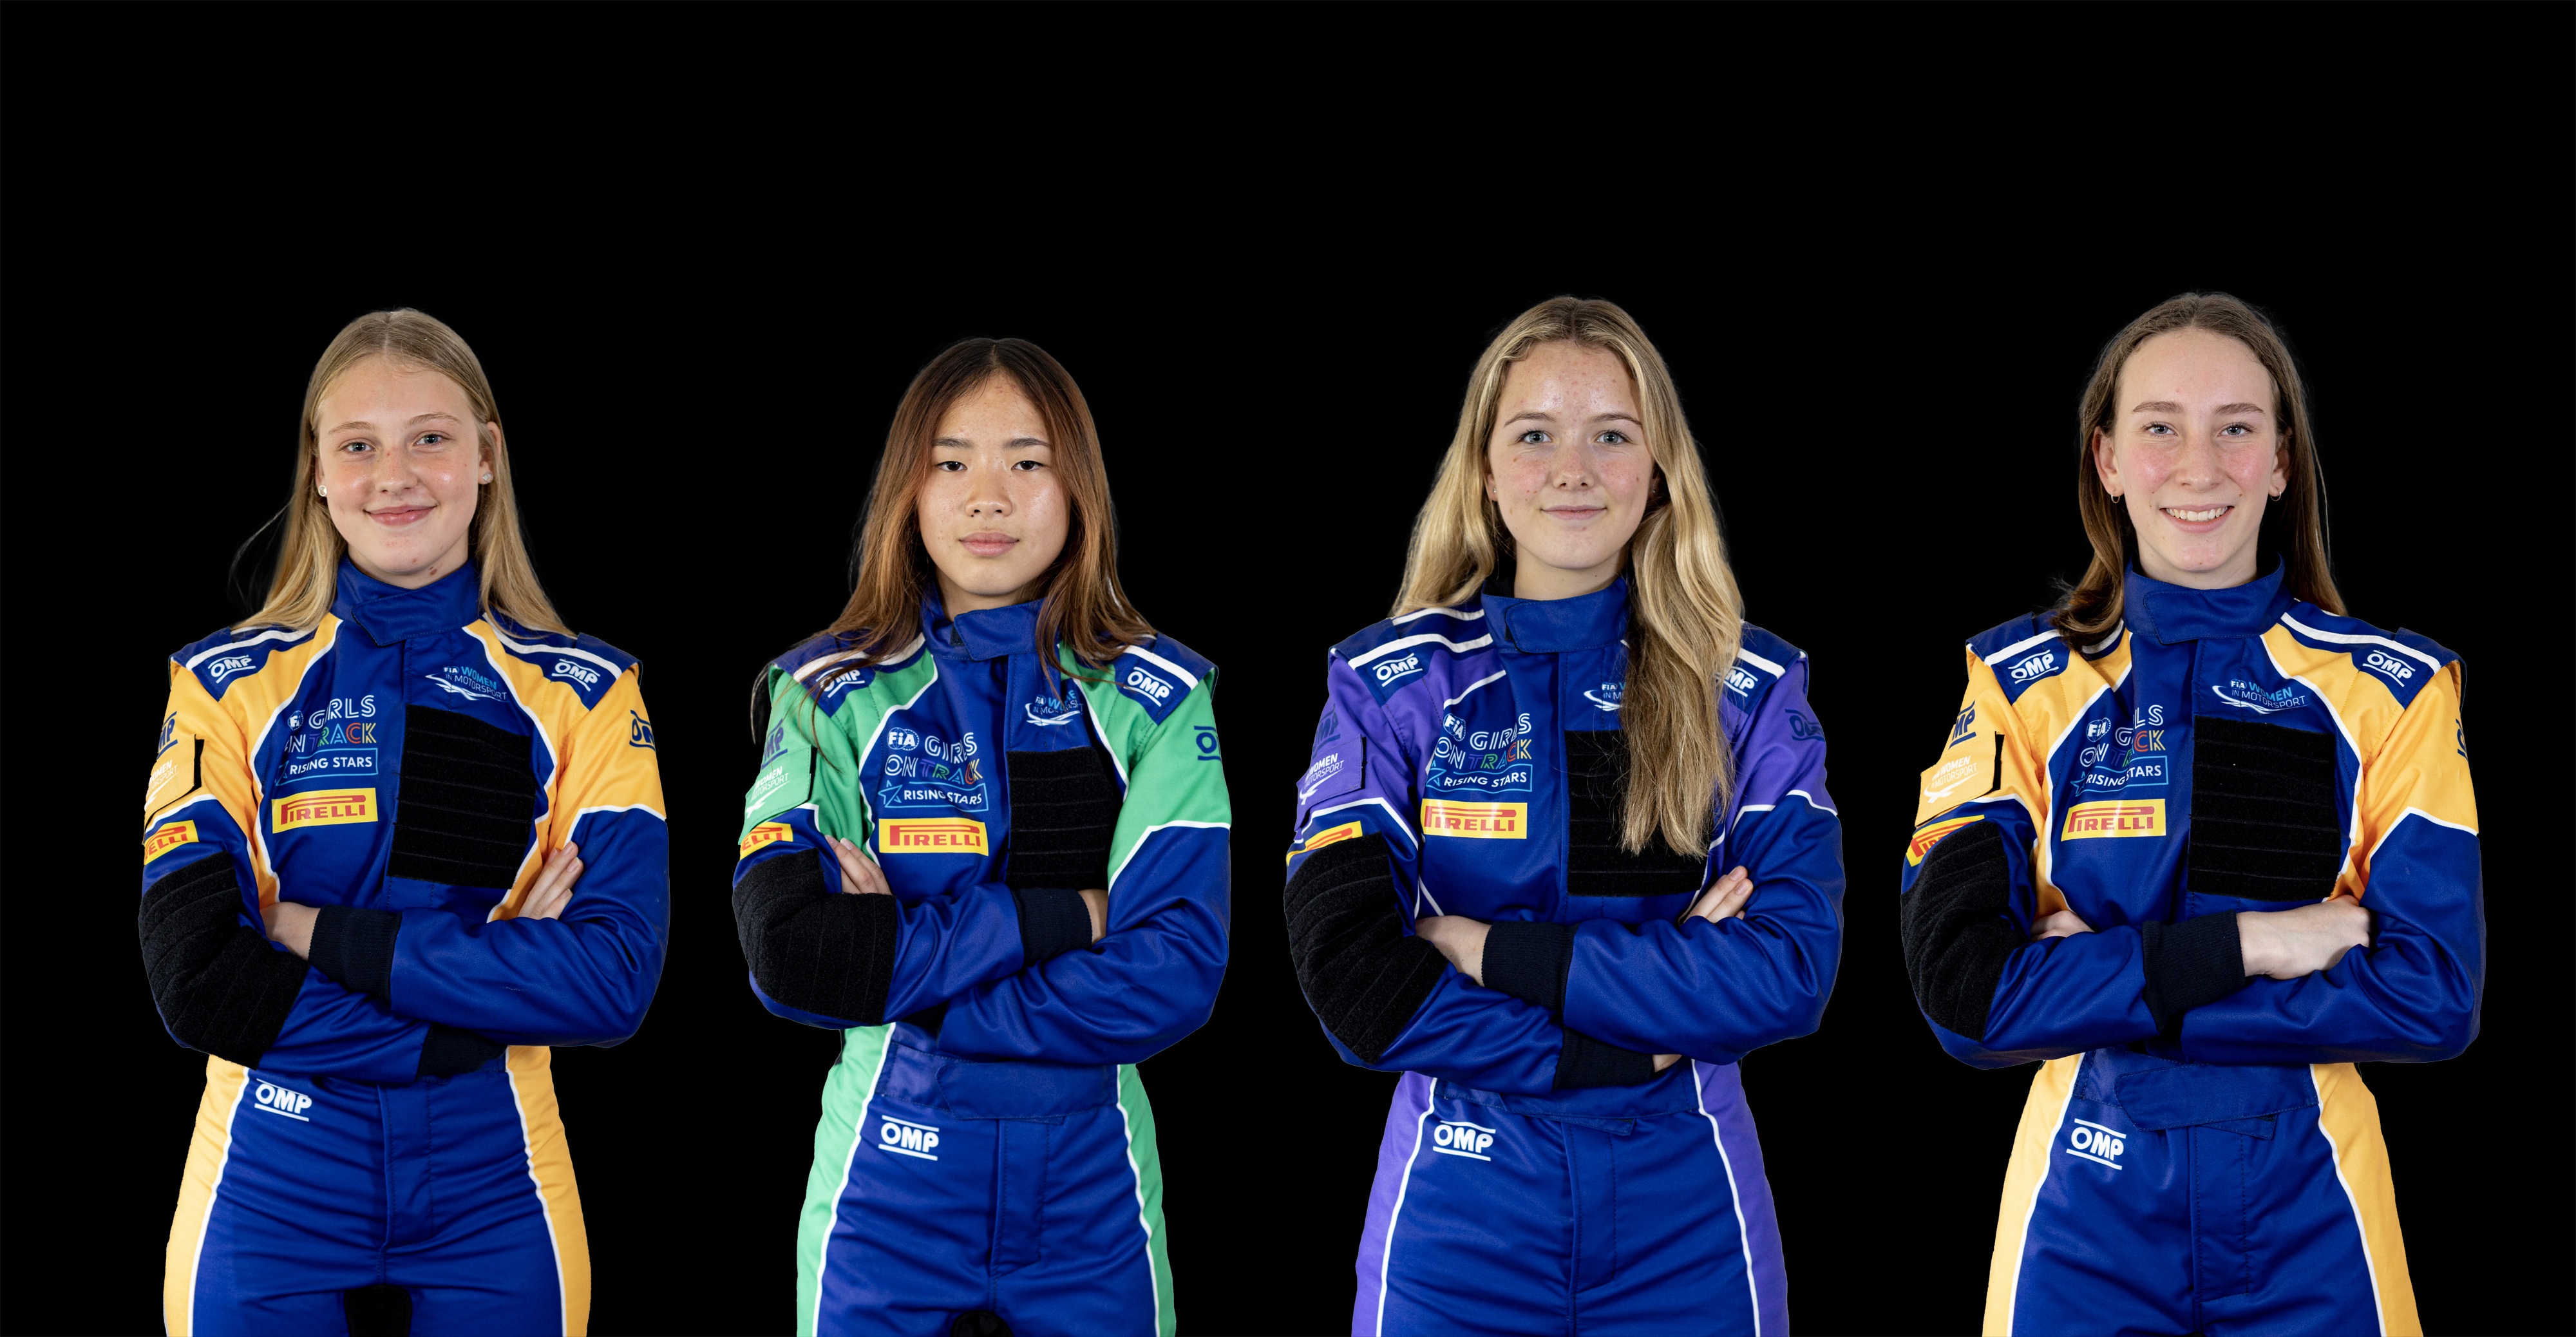 FIA GIRLS ON TRACK 2022 – RISING STARS: FOUR JUNIOR DRIVERS AND FOUR SENIOR DRIVERS ON THEIR ROAD TO THE FERRARI DRIVER ACADEMY FINAL